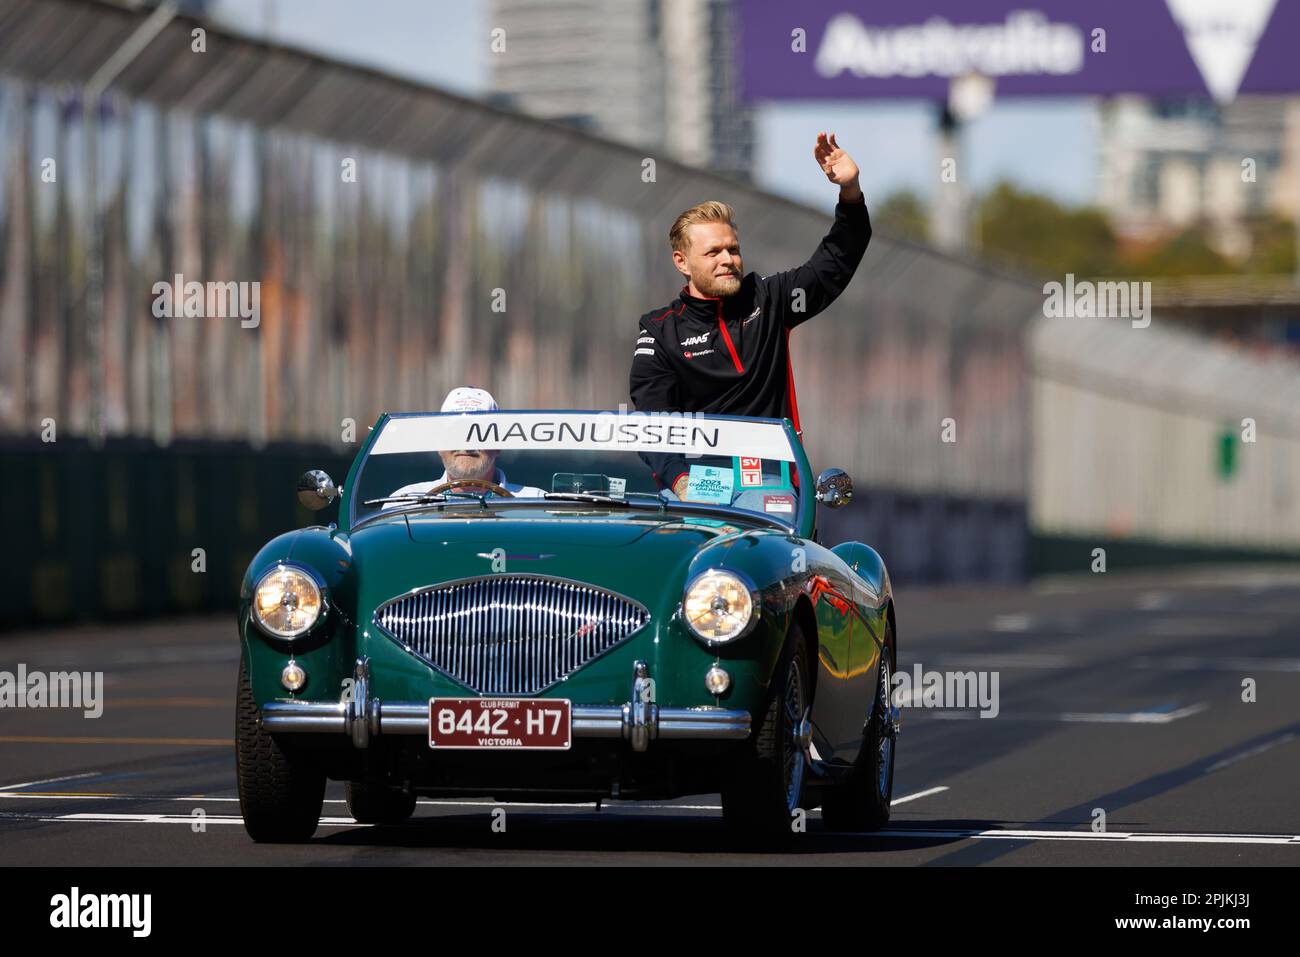 Albert Park, 2 April 2023  Kevin Magnussen (DEN) of the Haas F1 team during the driver's parade. corleve/Alamy Live News Stock Photo